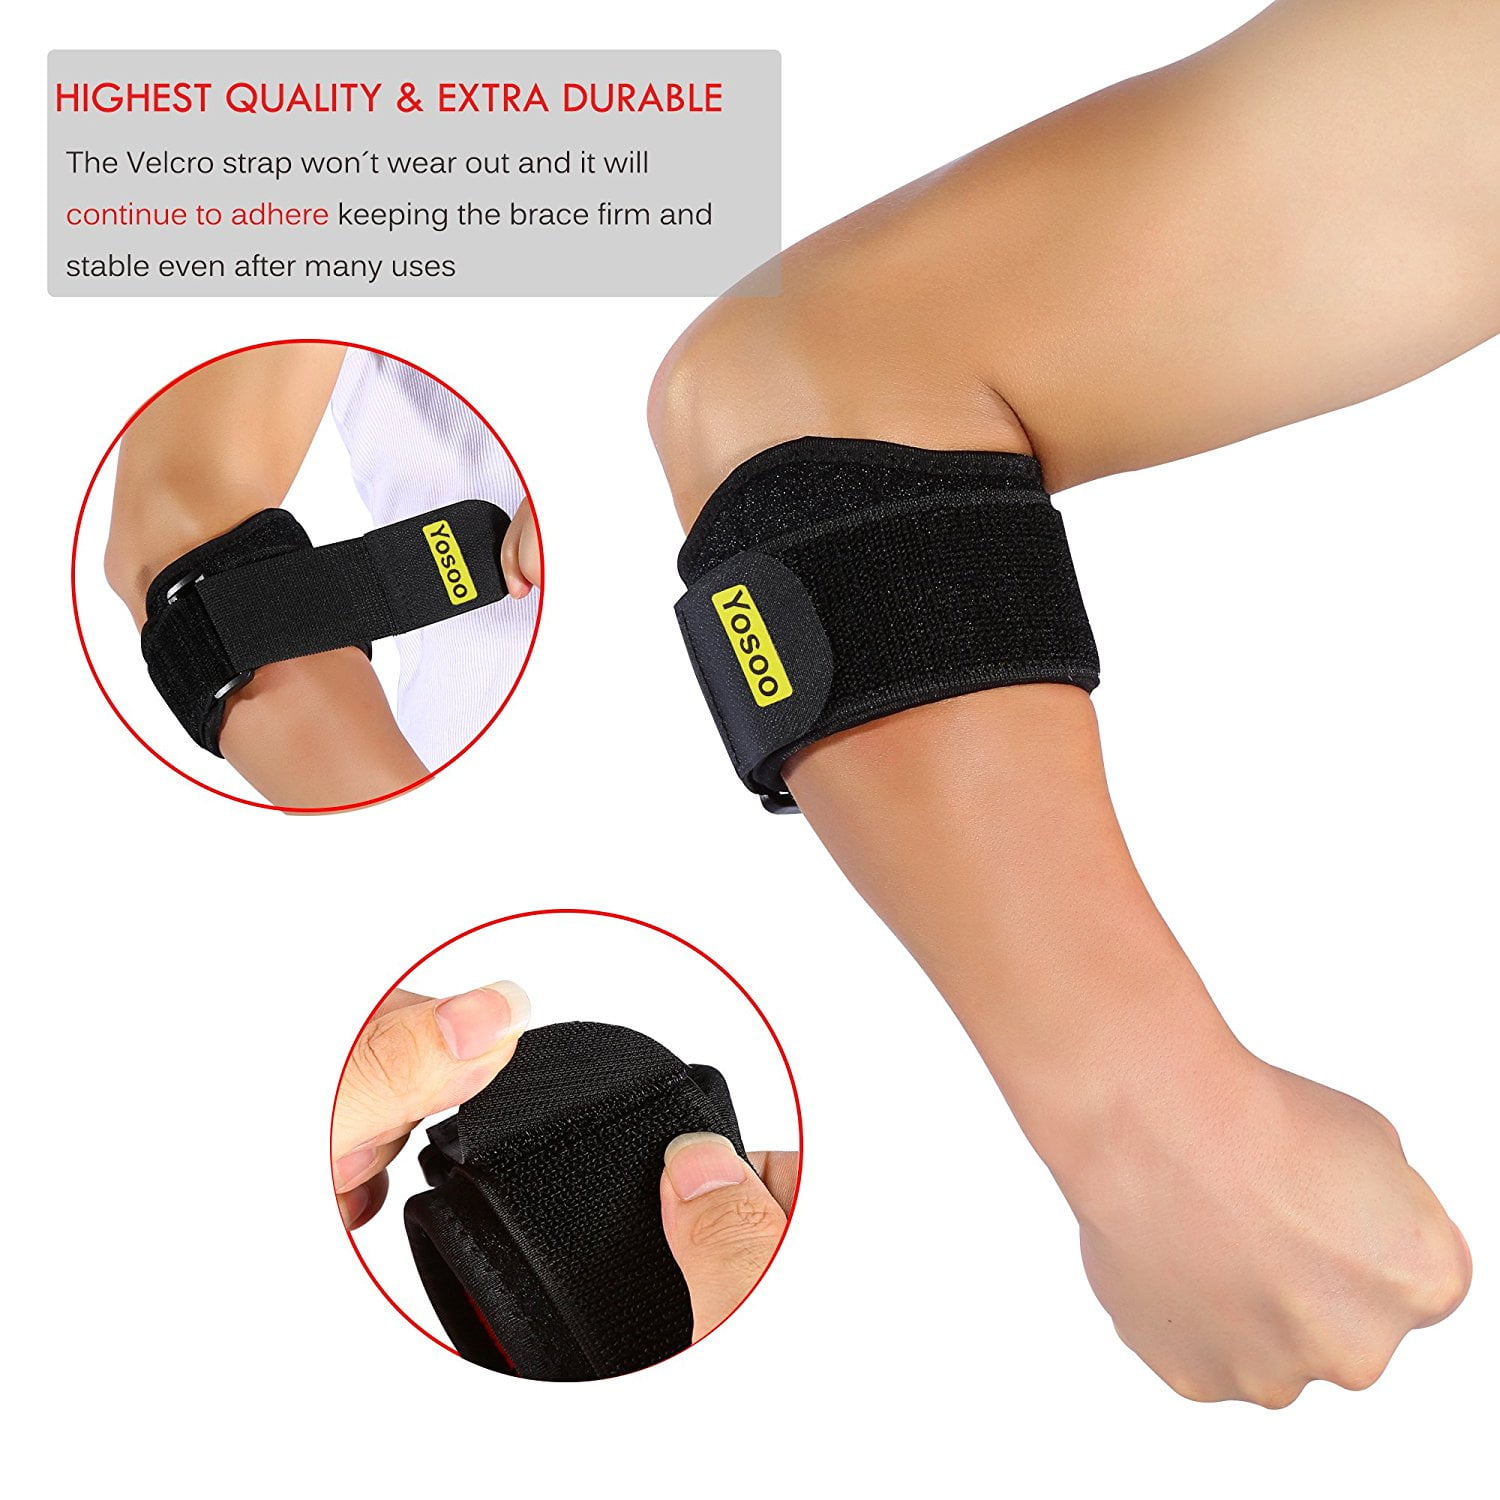 SPORTS TENNIS ELASTIC ELBOW/ARM WRAP BAND SUPPORT BRACE Made in USA 